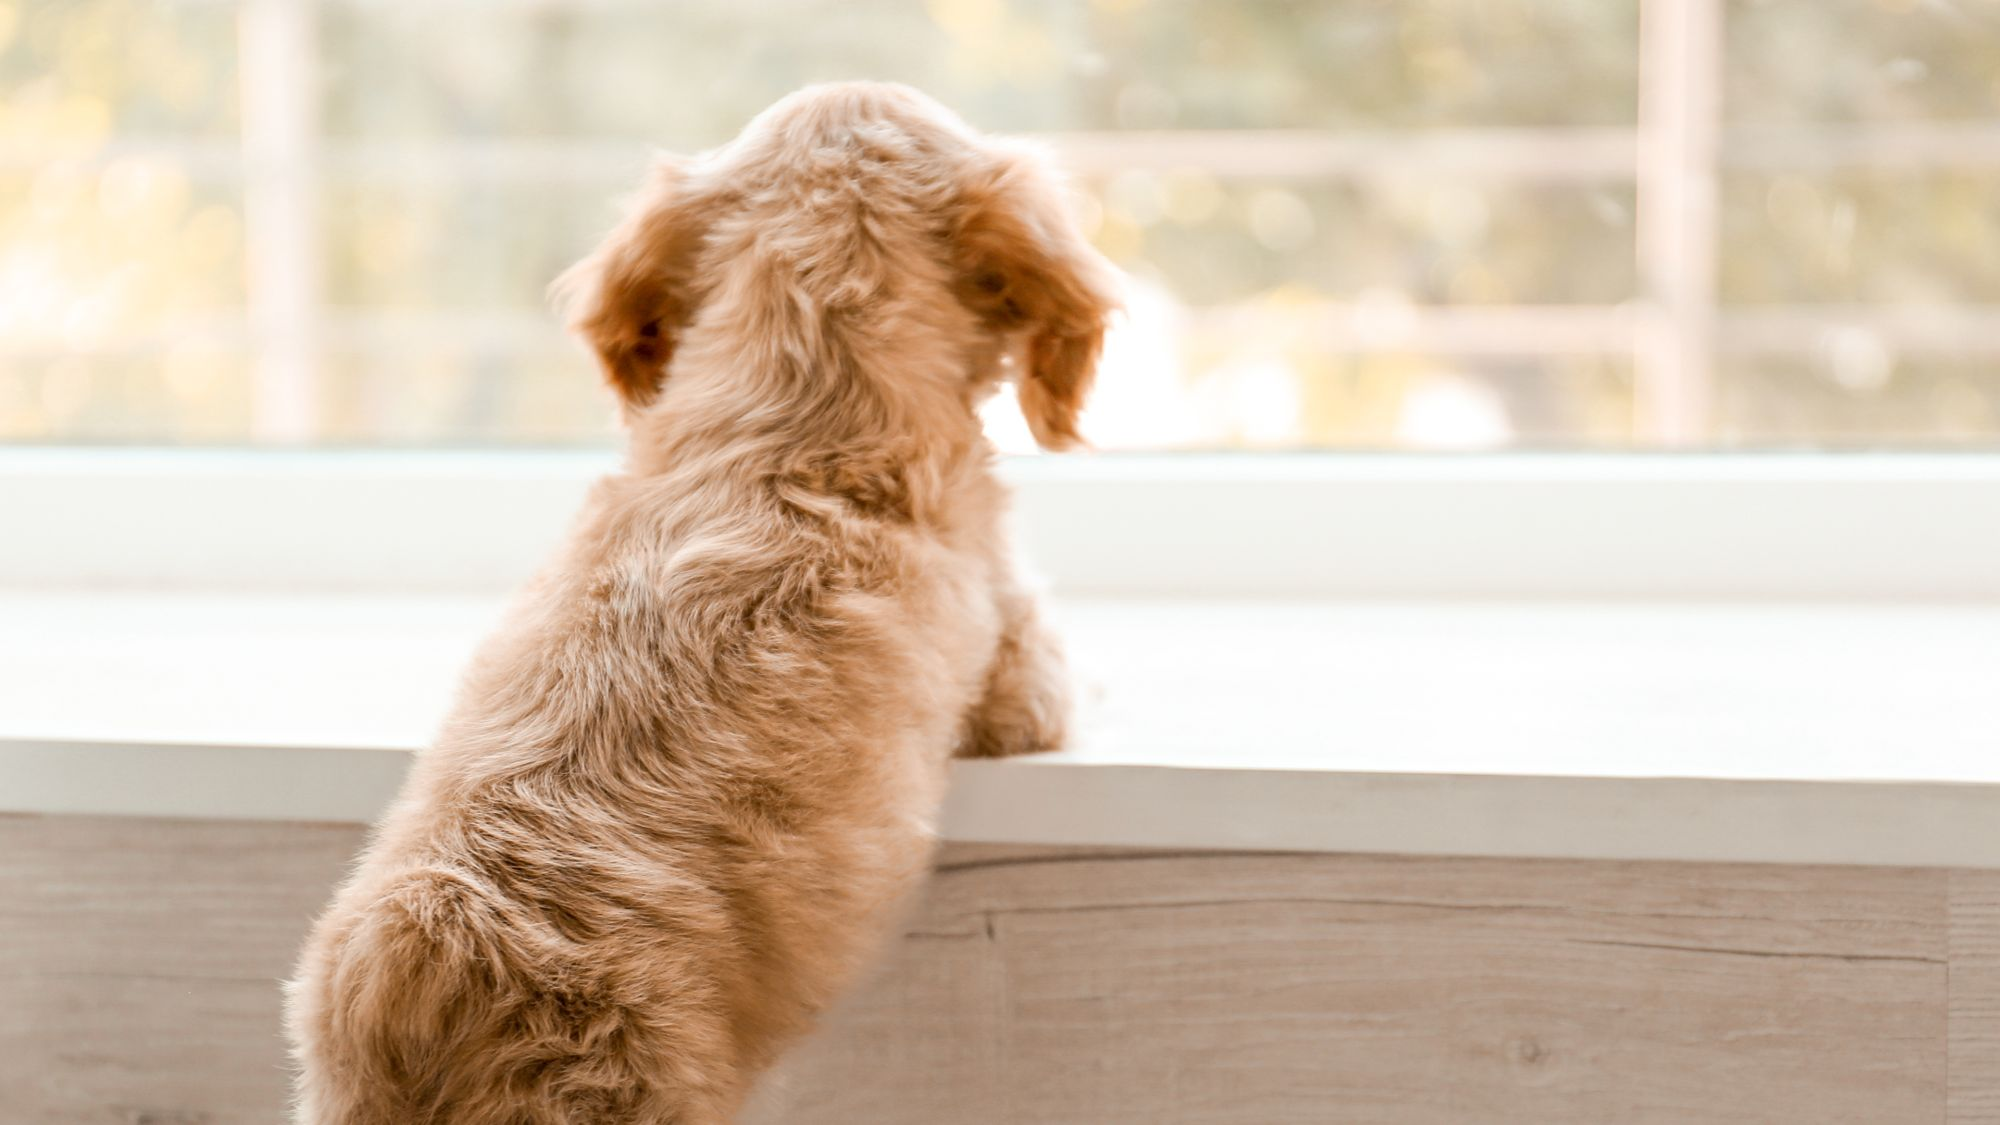 English Cocker Spaniel puppy stood indoors looking out of a window